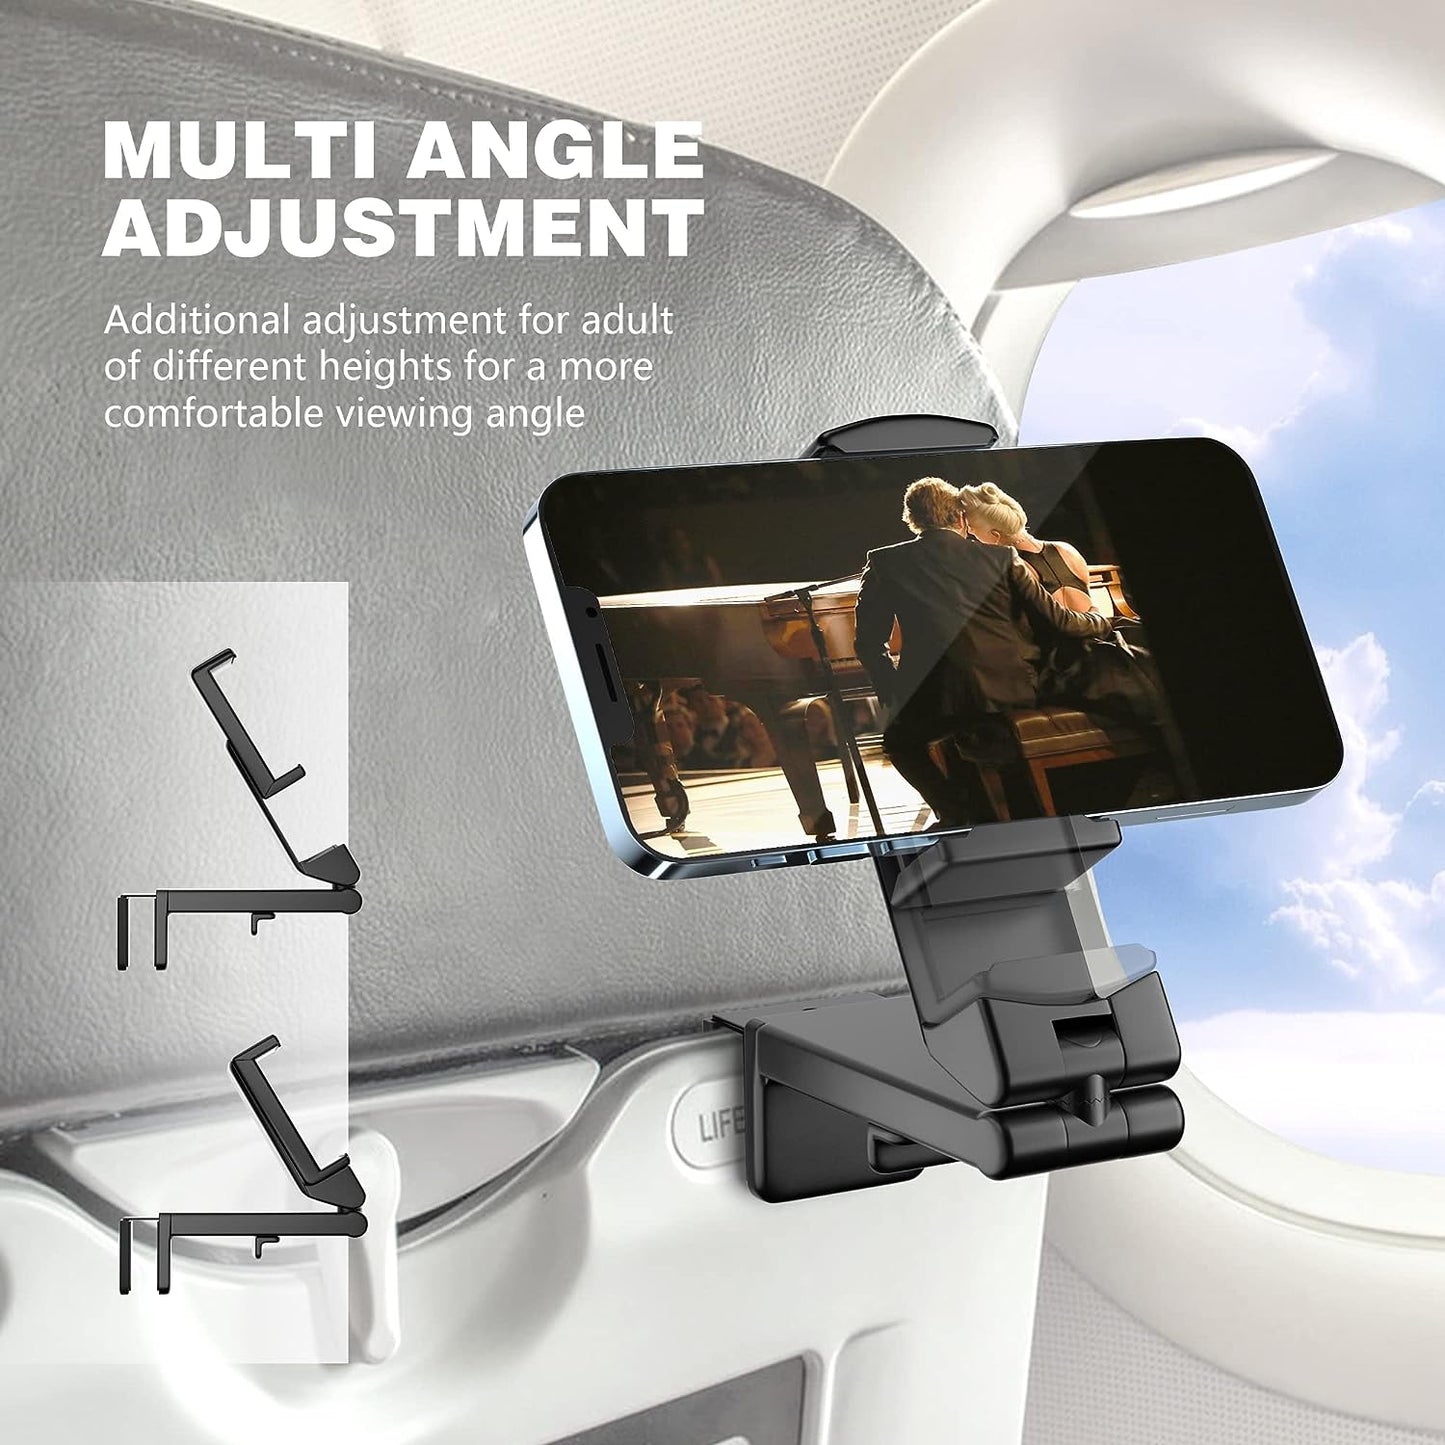 in Flight Airplane Phone Holder Mount. Handsfree Phone Holder for Desk Tray with Multi-Directional Dual 360 Degree Rotation. Pocket Size Must Have Travel Essential Accessory for Flying